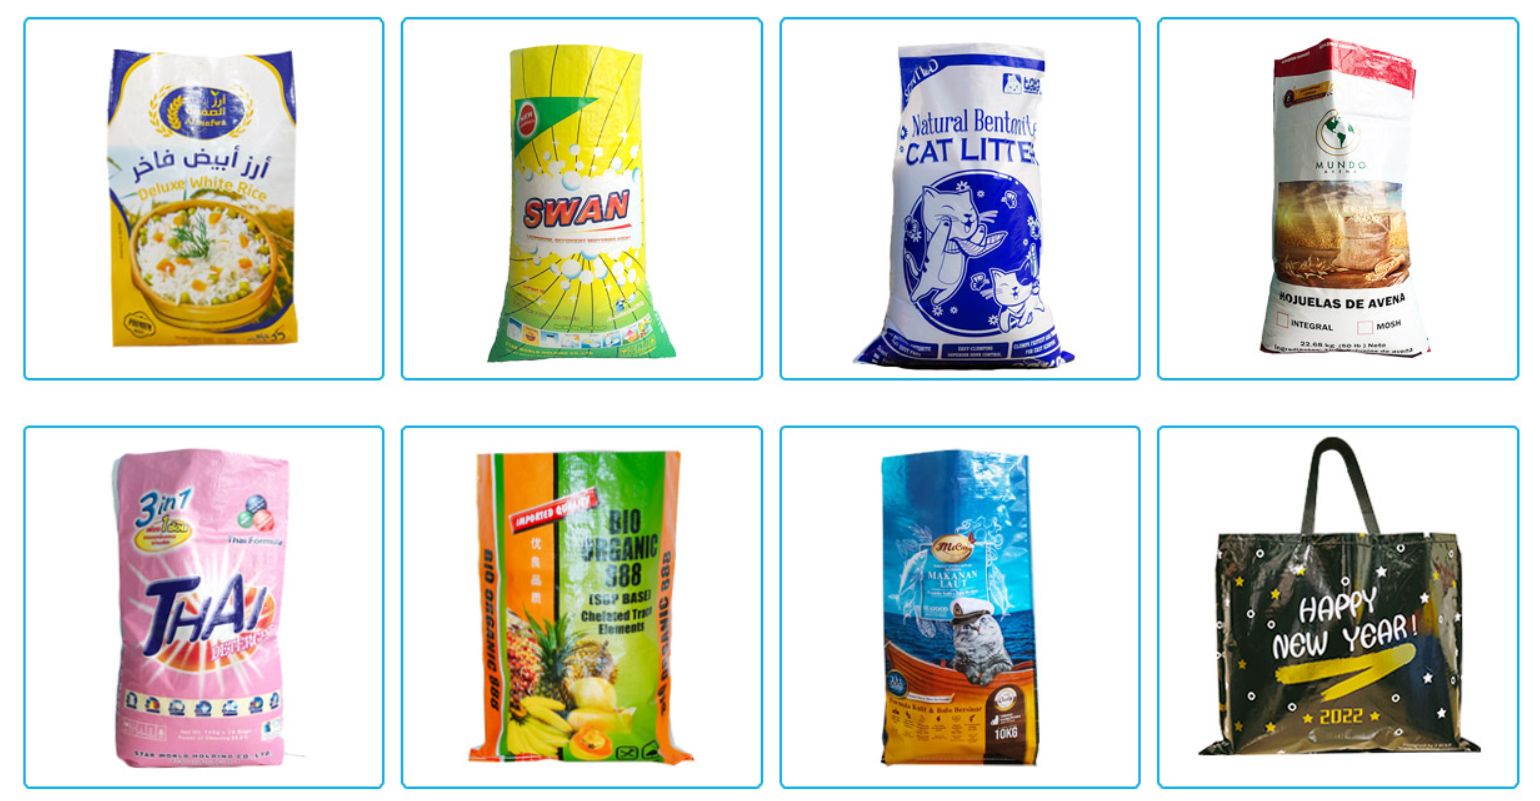 Woven PP bags are the ideal packaging to transport and store bulk , sugar, rice, animal feeds